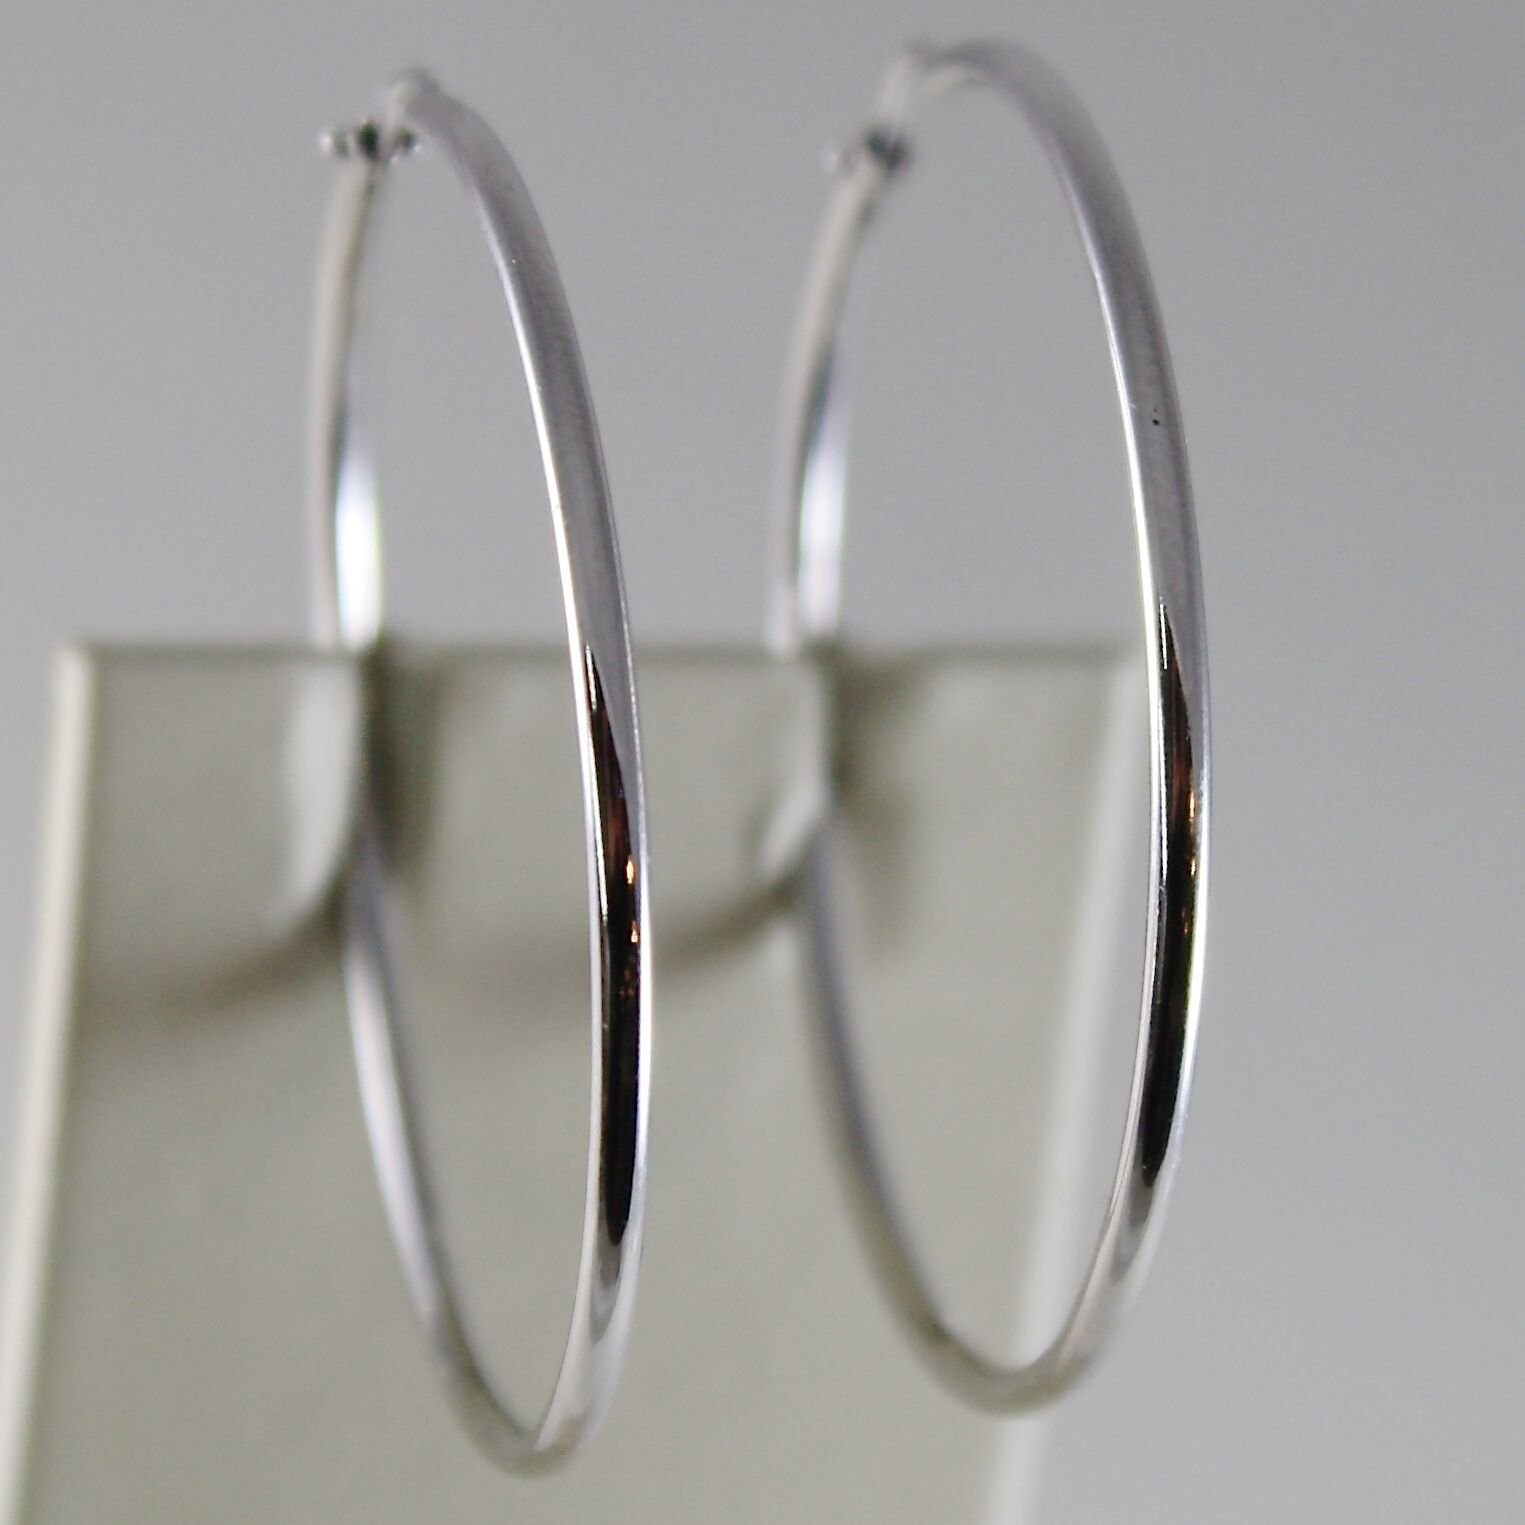 Primary image for 18K WHITE GOLD EARRINGS BIG CIRCLE HOOP 41 MM 1.61 INCH DIAMETER MADE IN ITALY